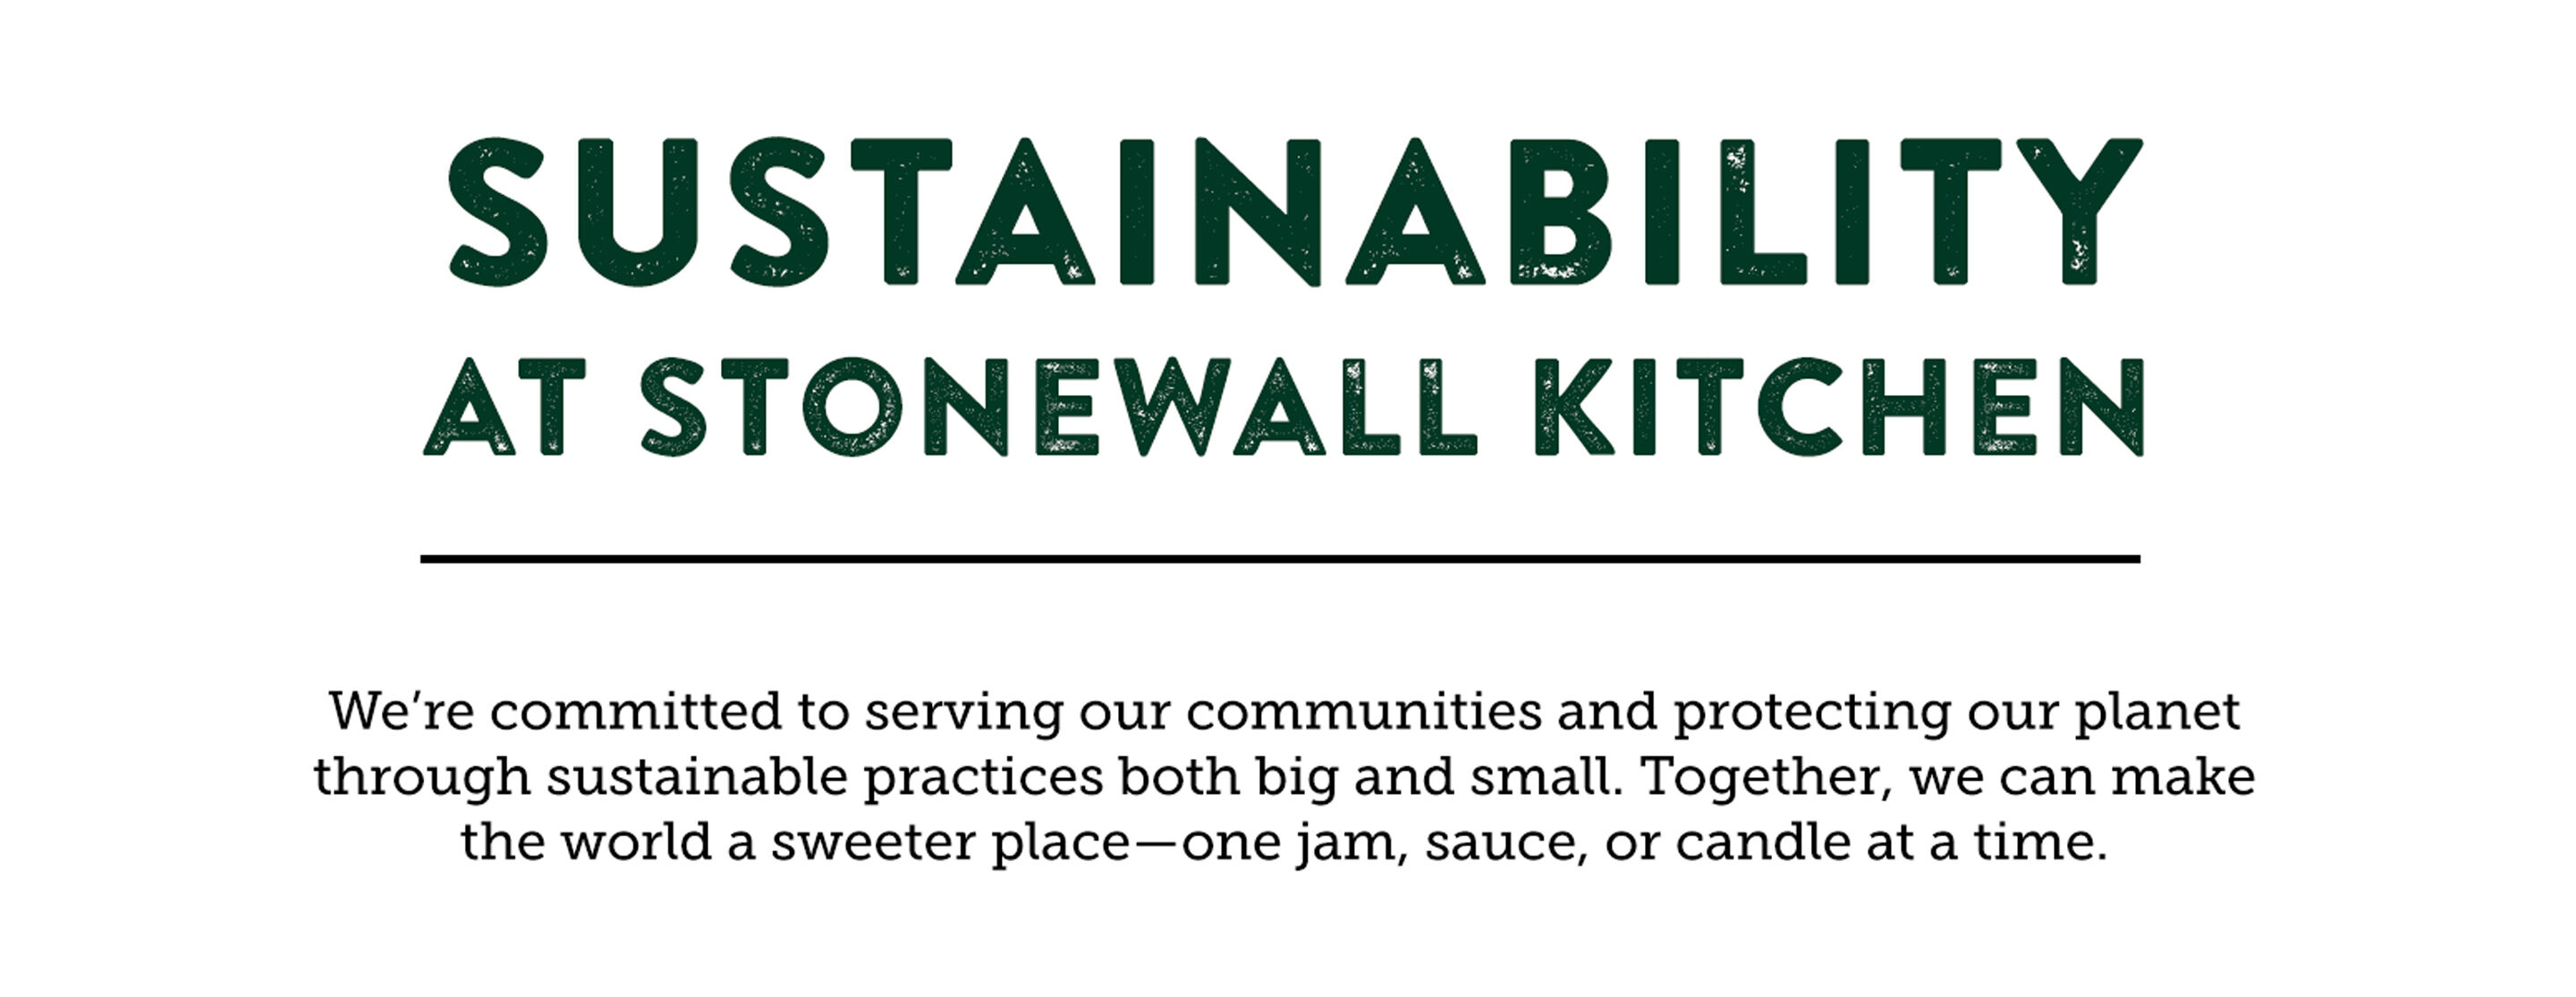 Sustainability at Stonewall Kitchen | We're committed to serving our communities and protecting our planet through sustainable practices both big and small. Together, we can make the world a sweeter place - one jam, sauce, or candle at a time.